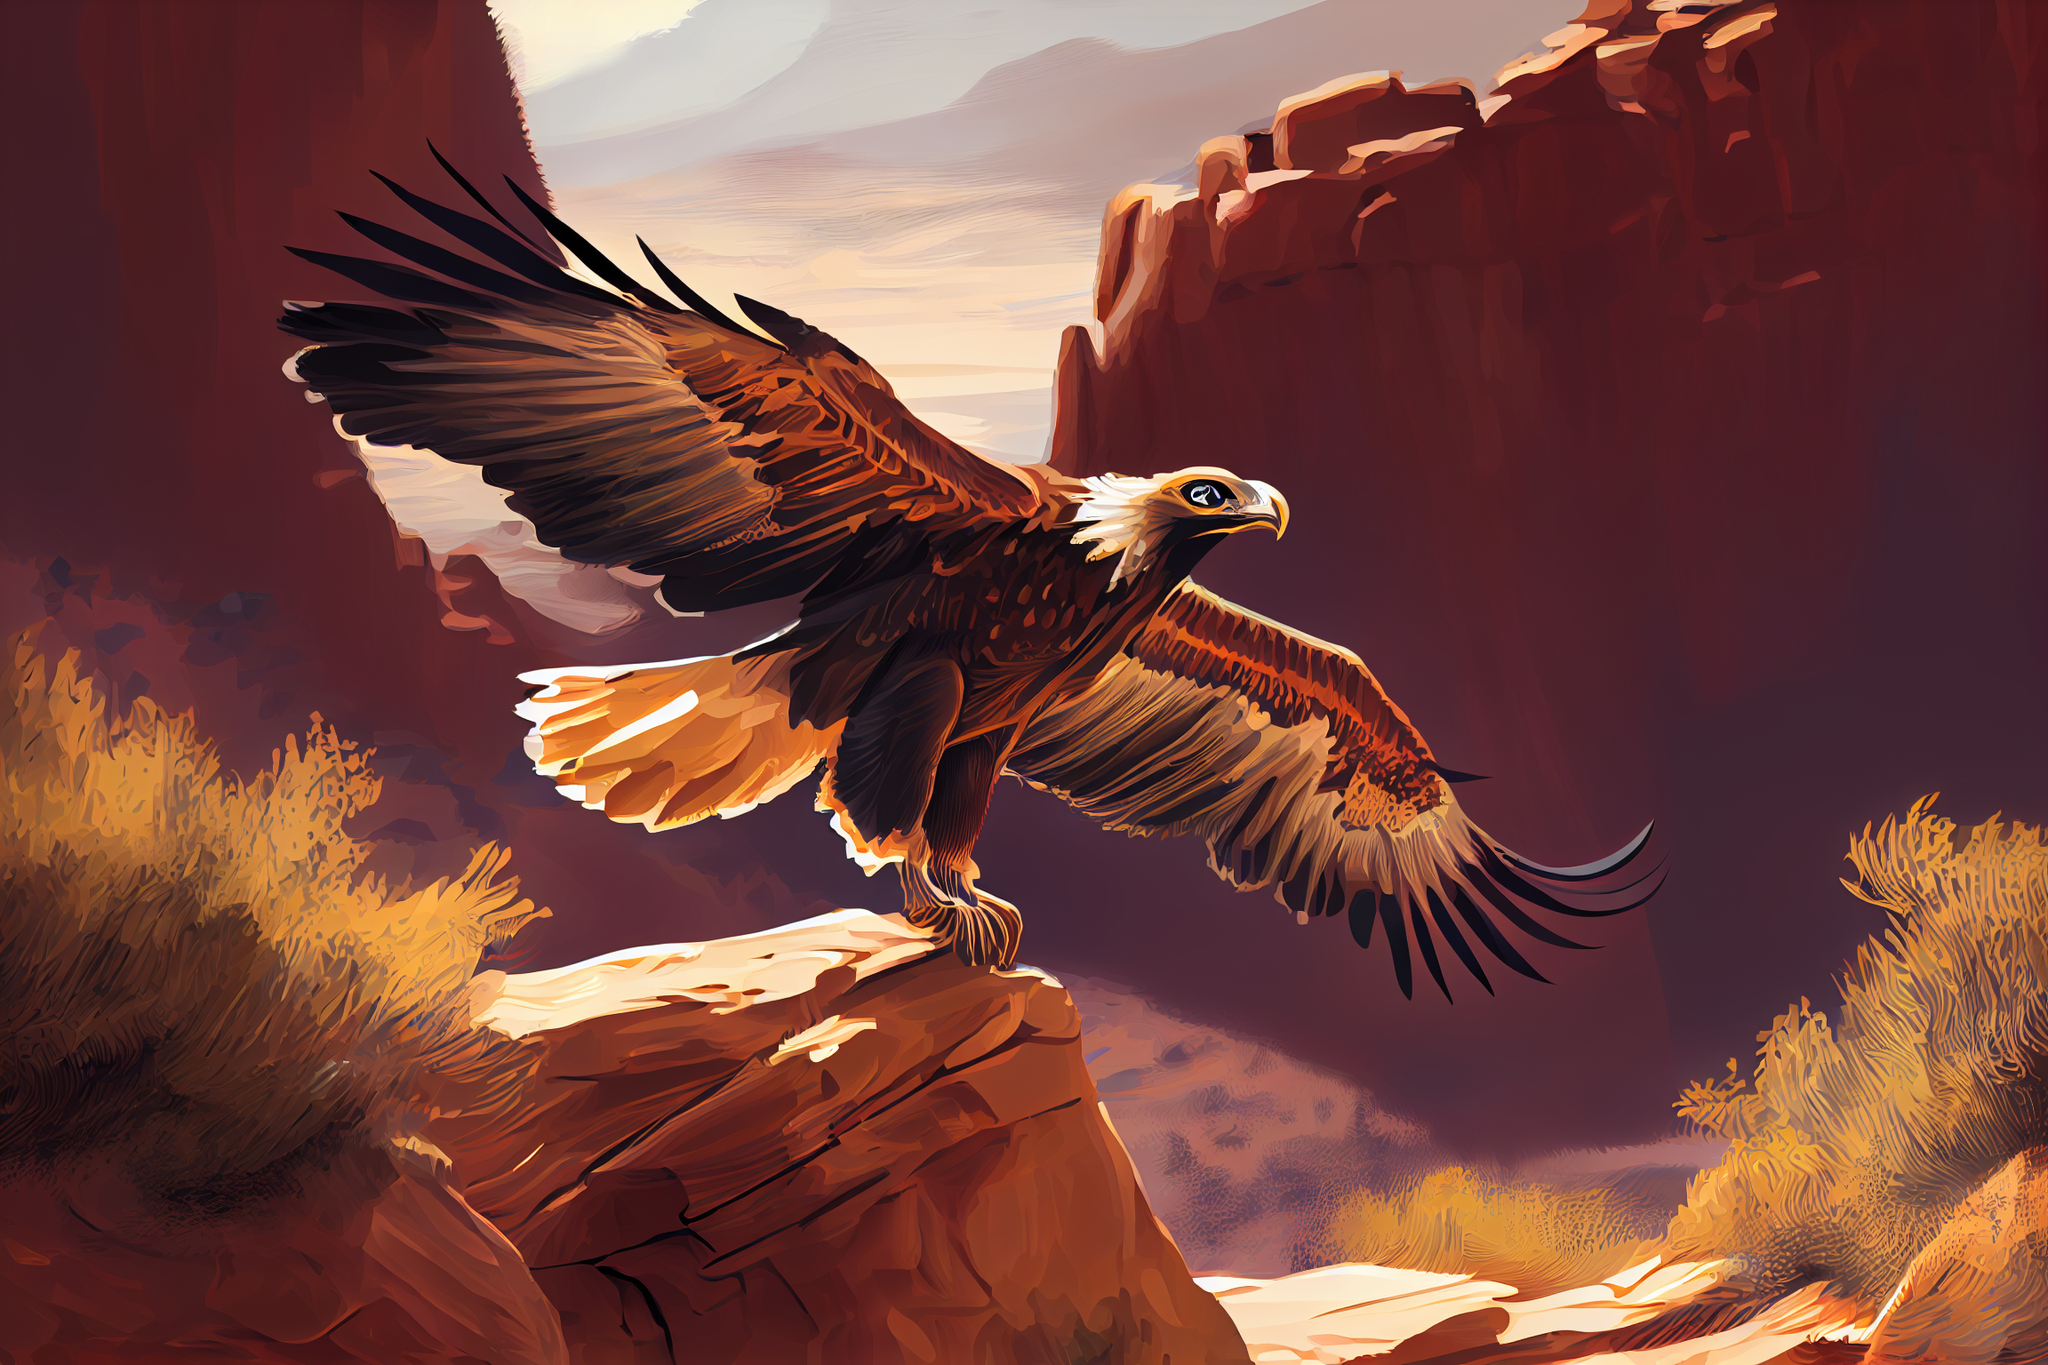 Wings of Freedom: An Oil Color Print of the Majestic Golden Eagle in Flight